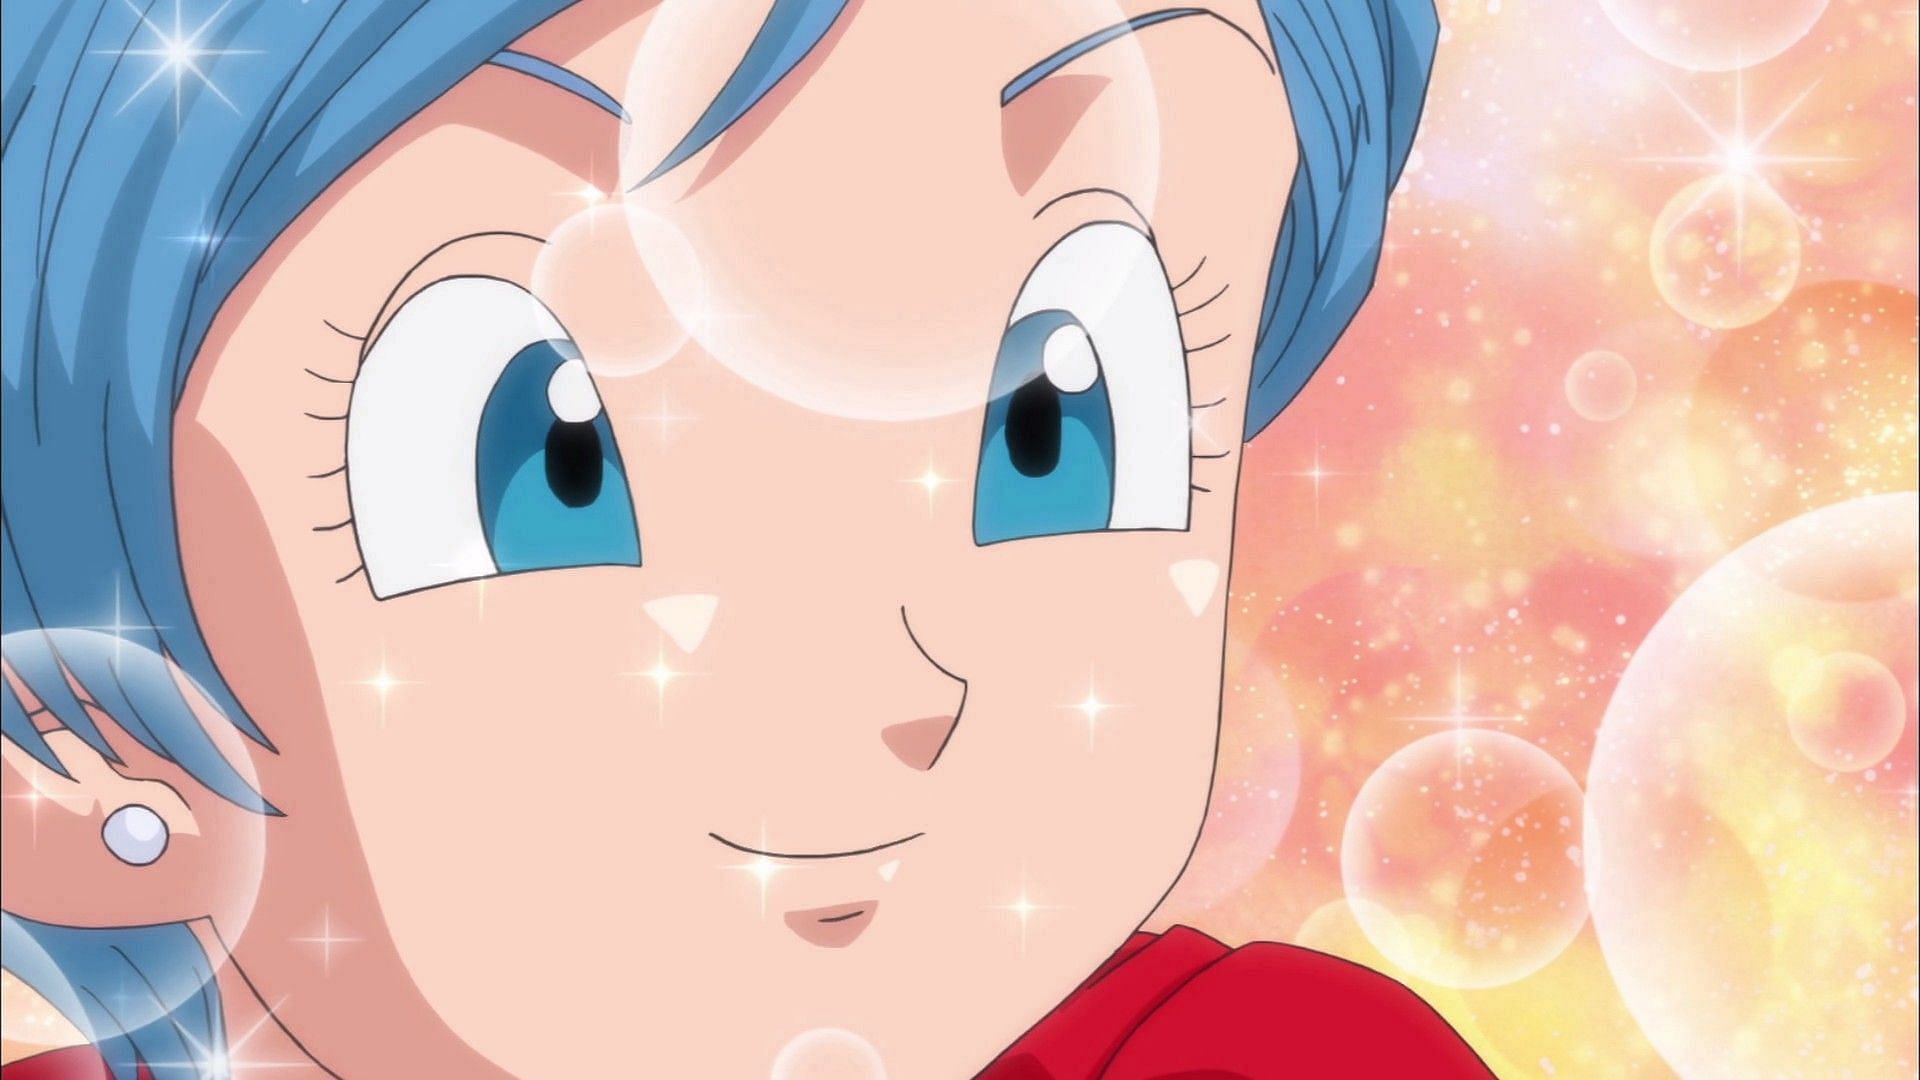 Understanding the importance of Bulma as a charcater in the Dragon Ball series (Image via Toei Animation)